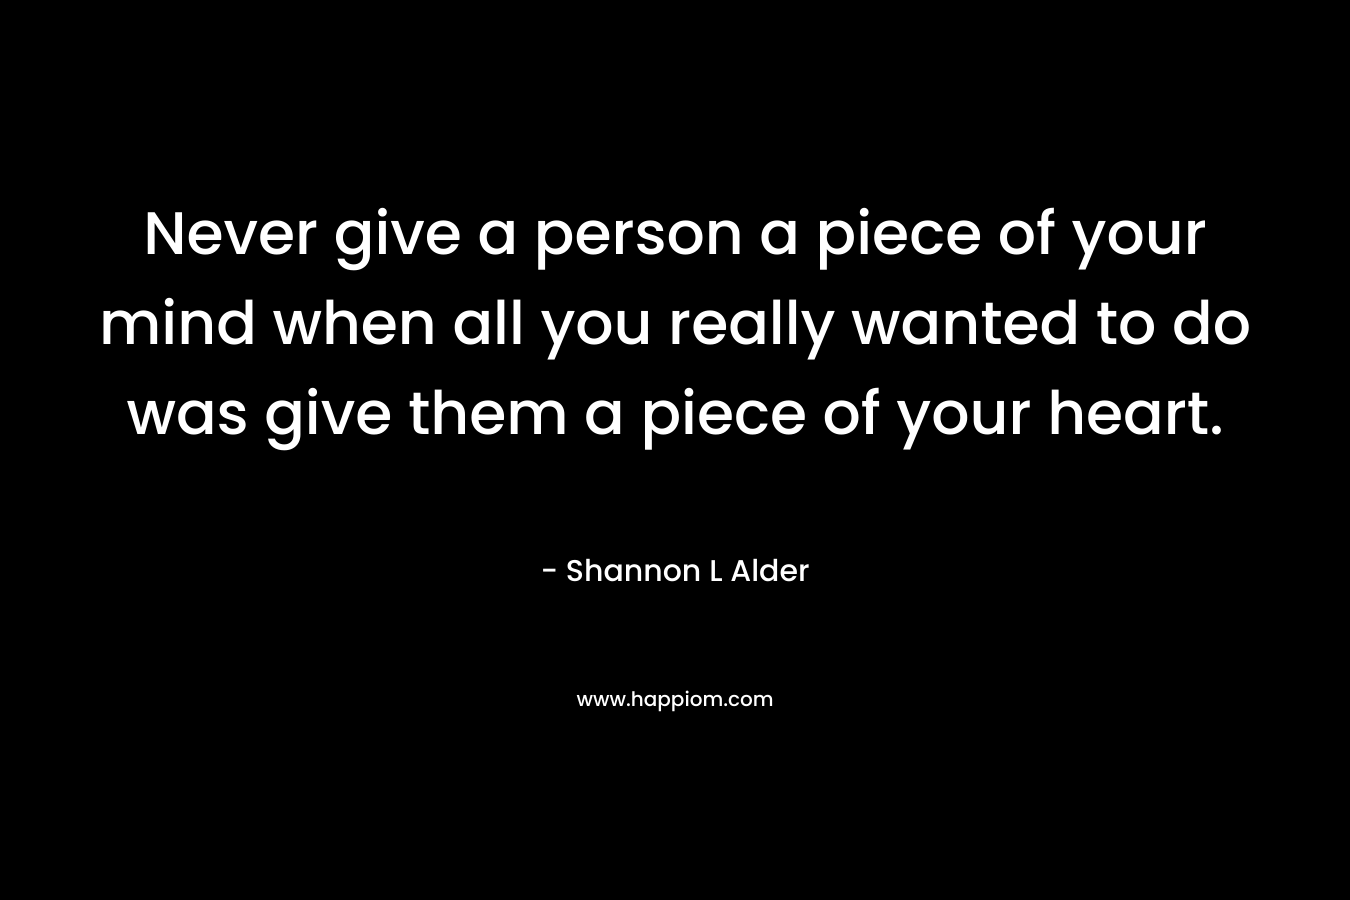 Never give a person a piece of your mind when all you really wanted to do was give them a piece of your heart.